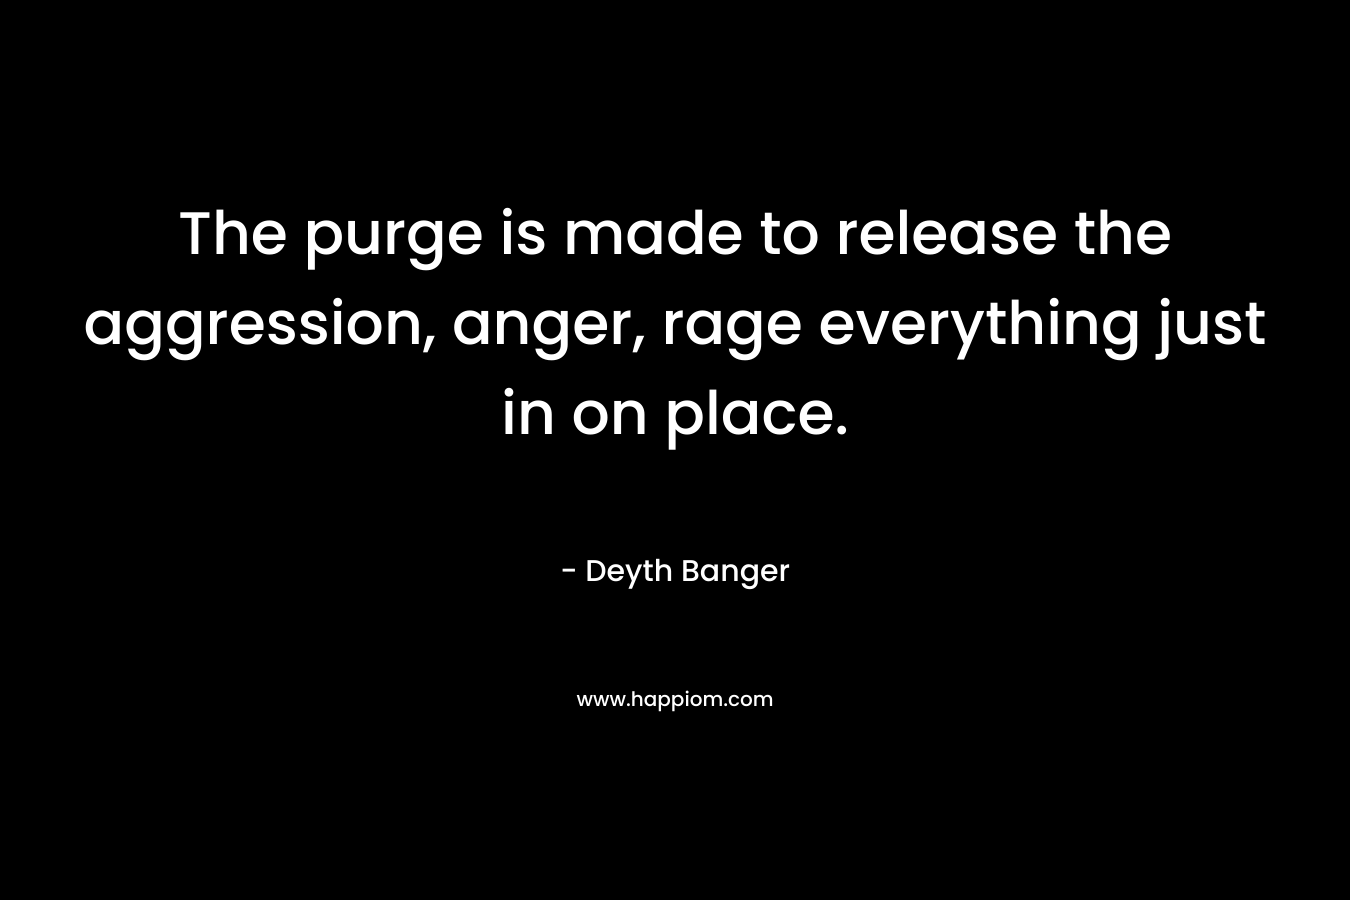 The purge is made to release the aggression, anger, rage everything just in on place. – Deyth Banger